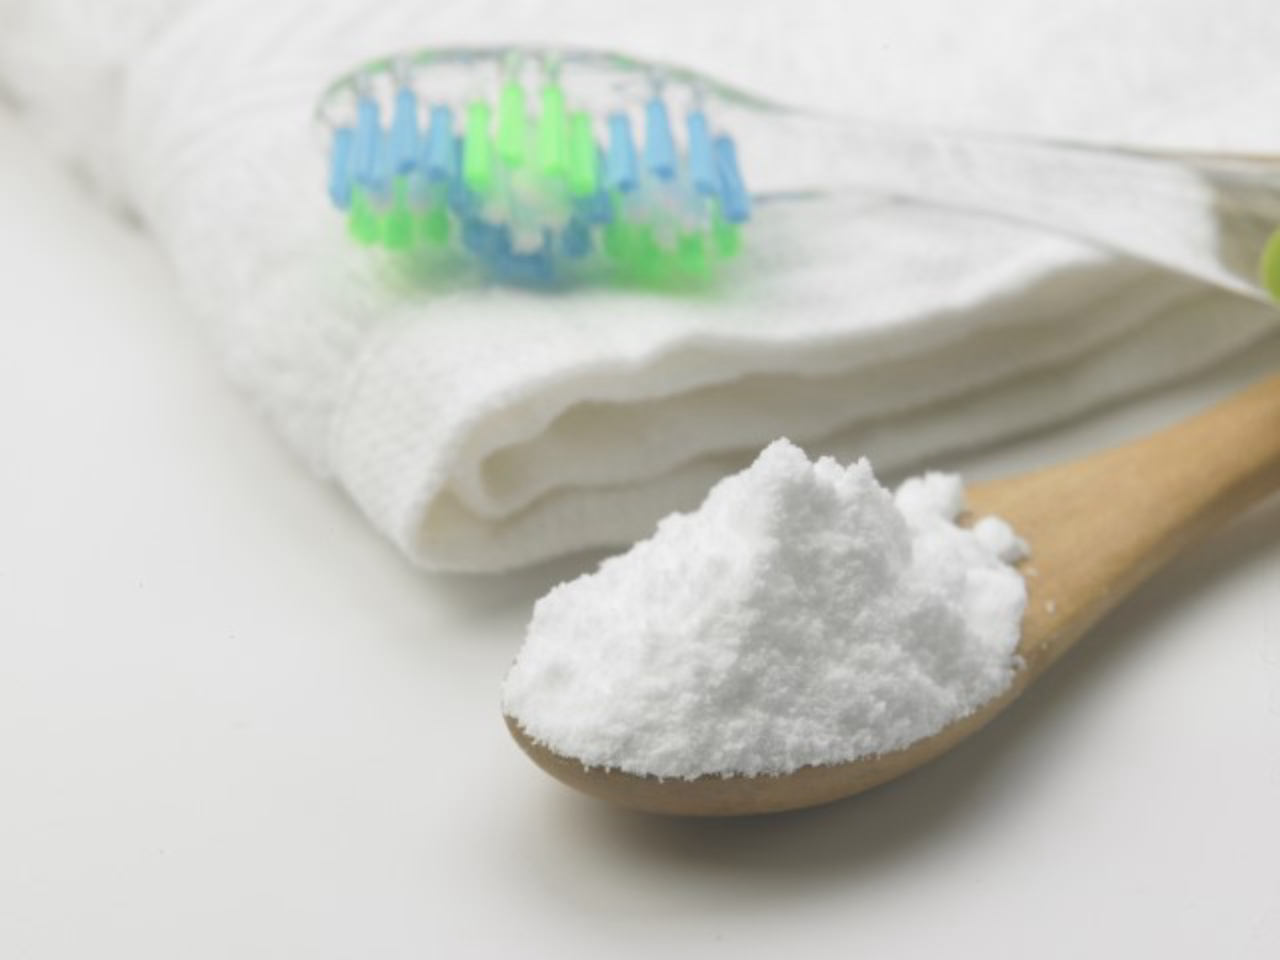 Toothbrush and baking soda to clean